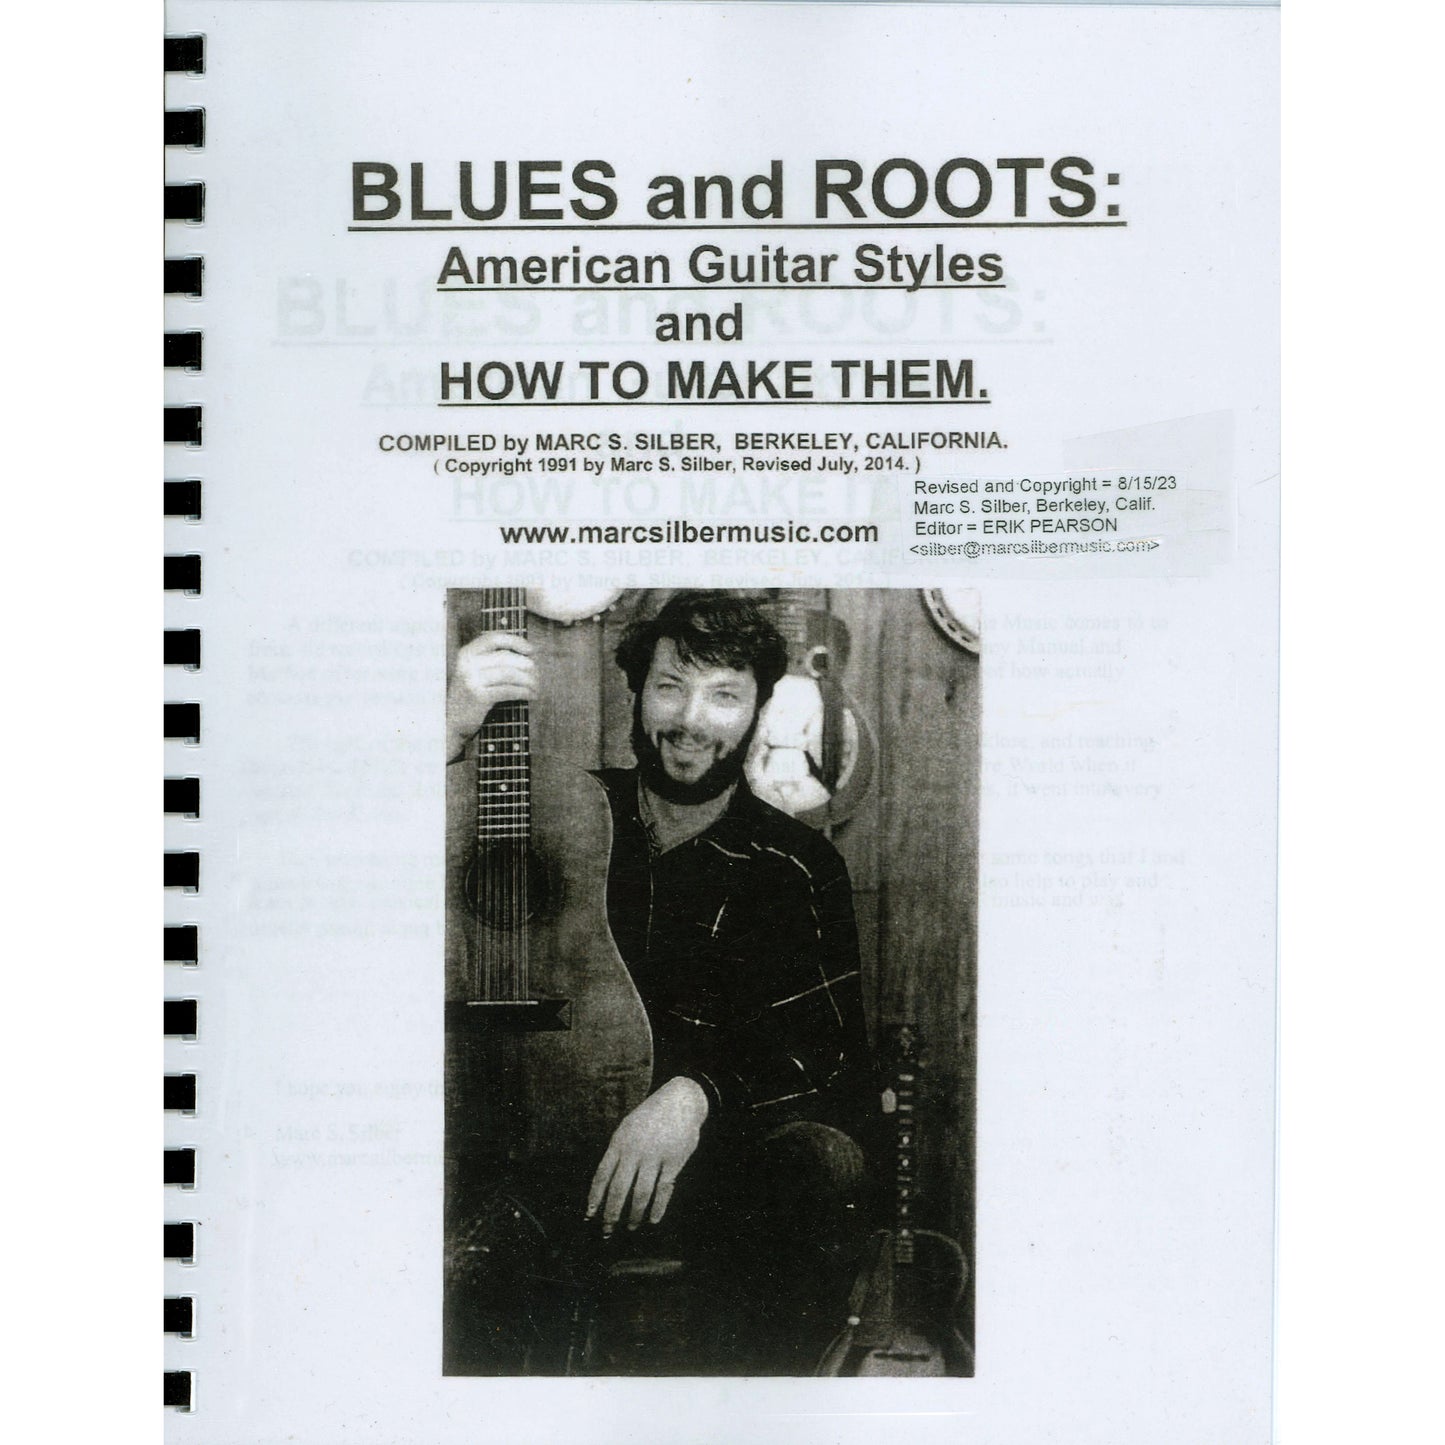 image 1 : Cover of Blues and Roots: American Guitar Styles and How to Make Them. by Marc S. Silber SKU: 841-1